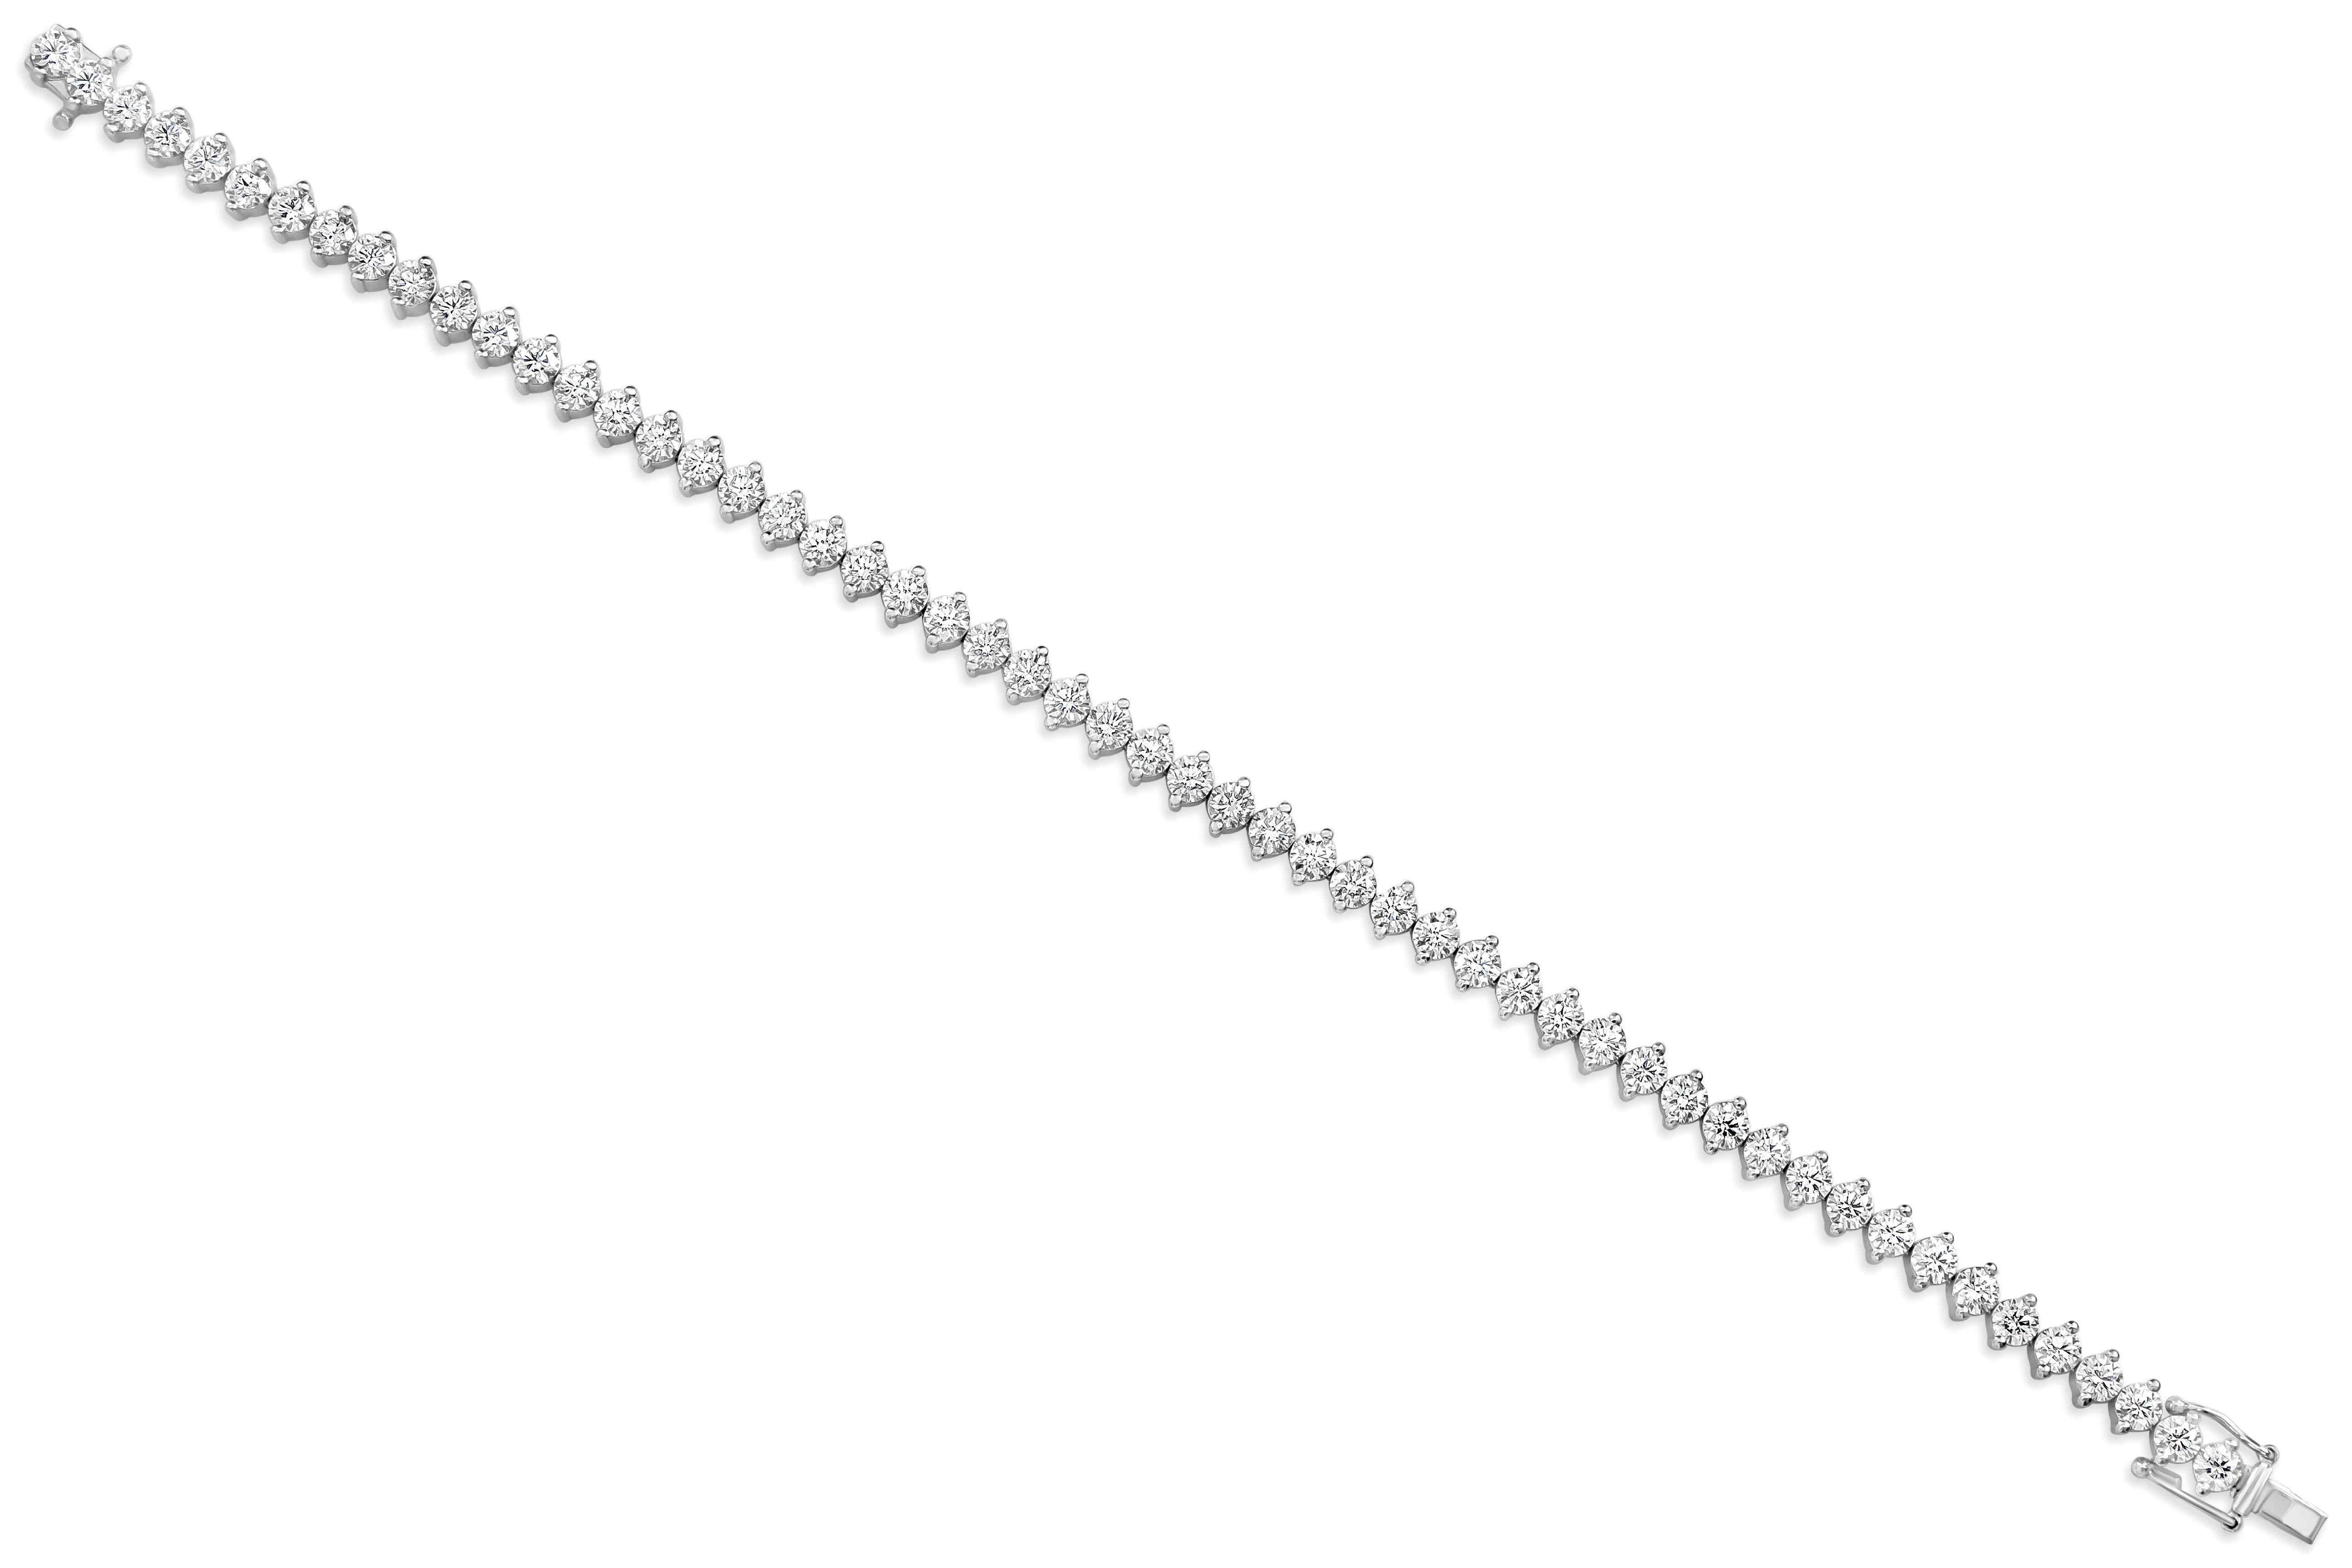 A unique tennis bracelet showcasing a line of brilliant round diamonds securely set in a two prong white gold setting. Diamonds weigh 7.26 carats total. Made in 18 karat white gold.

